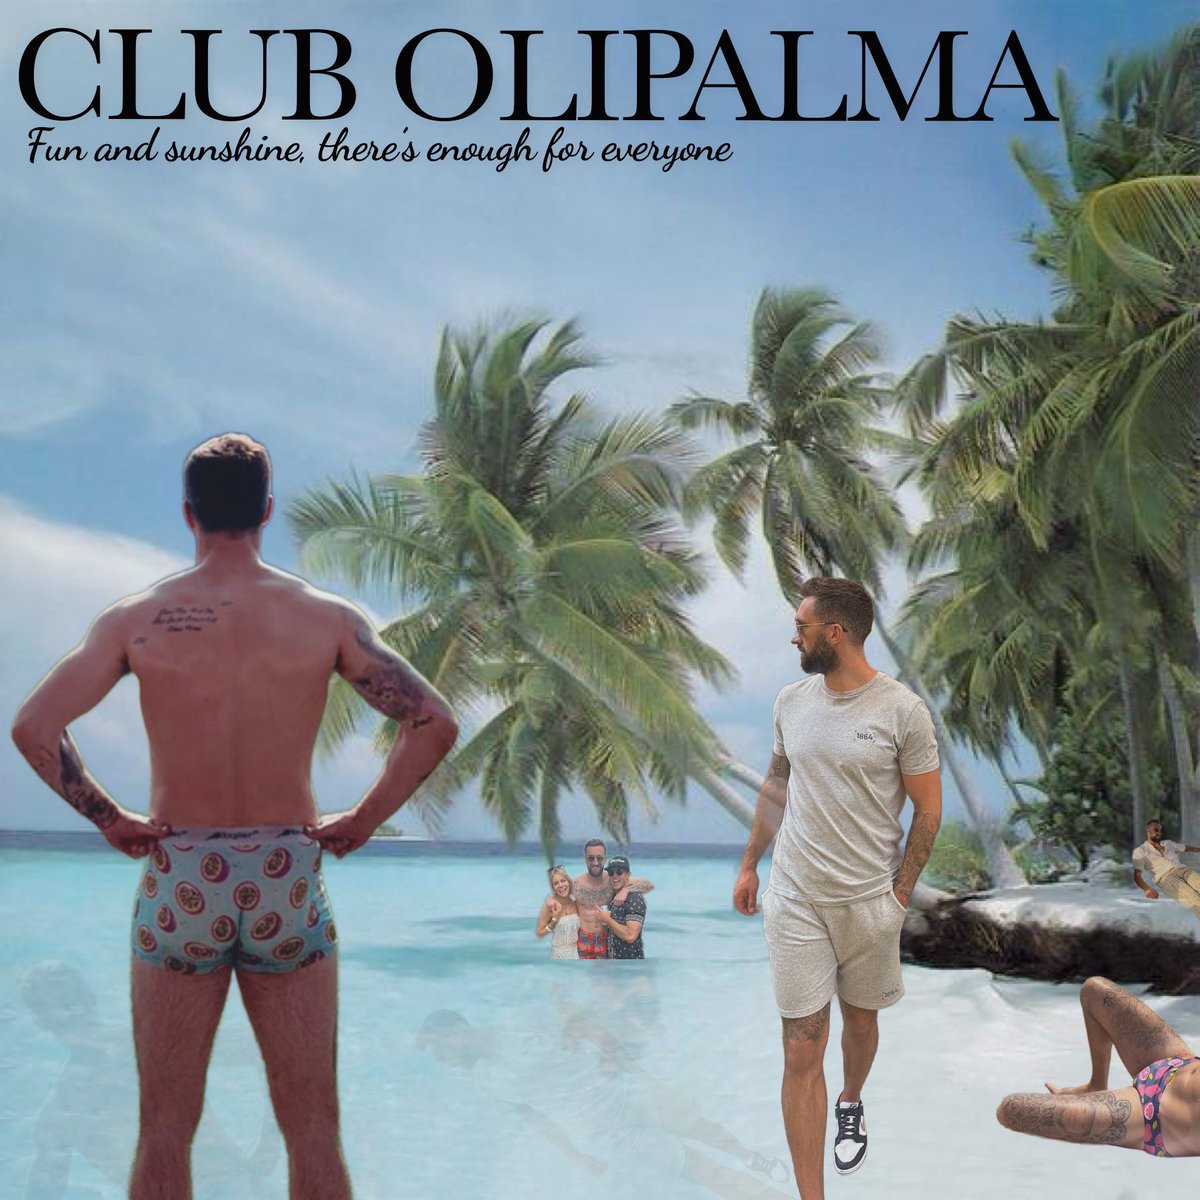 In the year 2031, Quentin Tarantino breaks his promise to release only 10 movies and comes out of retirement to direct a film based on Wrexham FC maverick and cult hero, Ollie Palmer. 

What’s going on the soundtrack to Club Olipalma?

#olliepalmer #wrexhamAFC